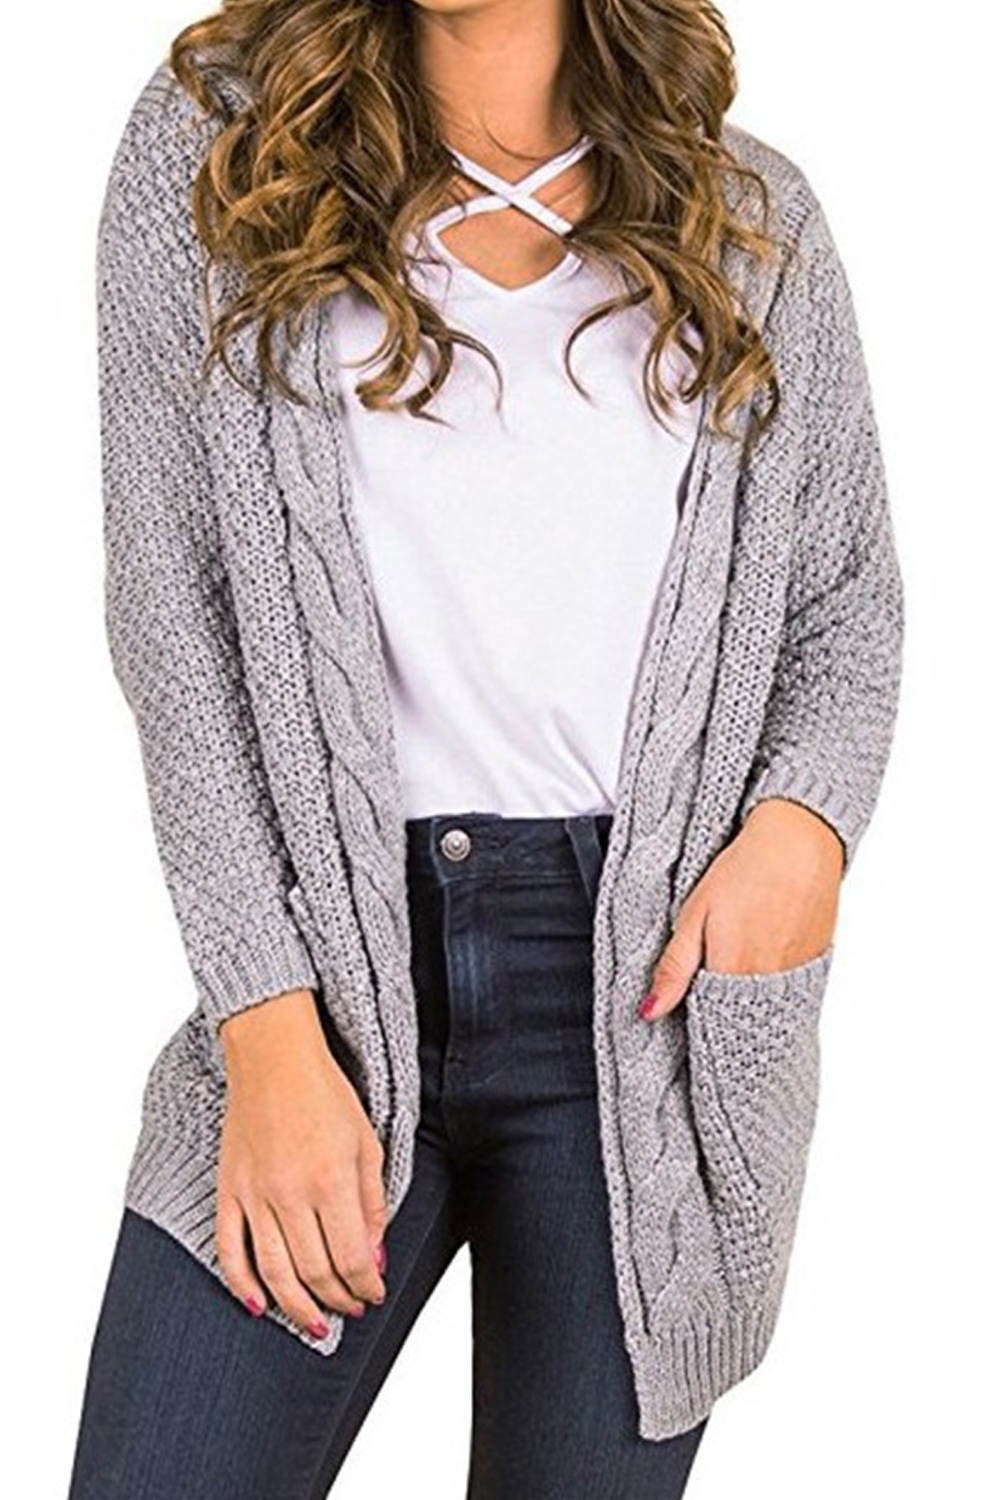 TOMCARRY Women Solid Color Casual Warm Cardigan